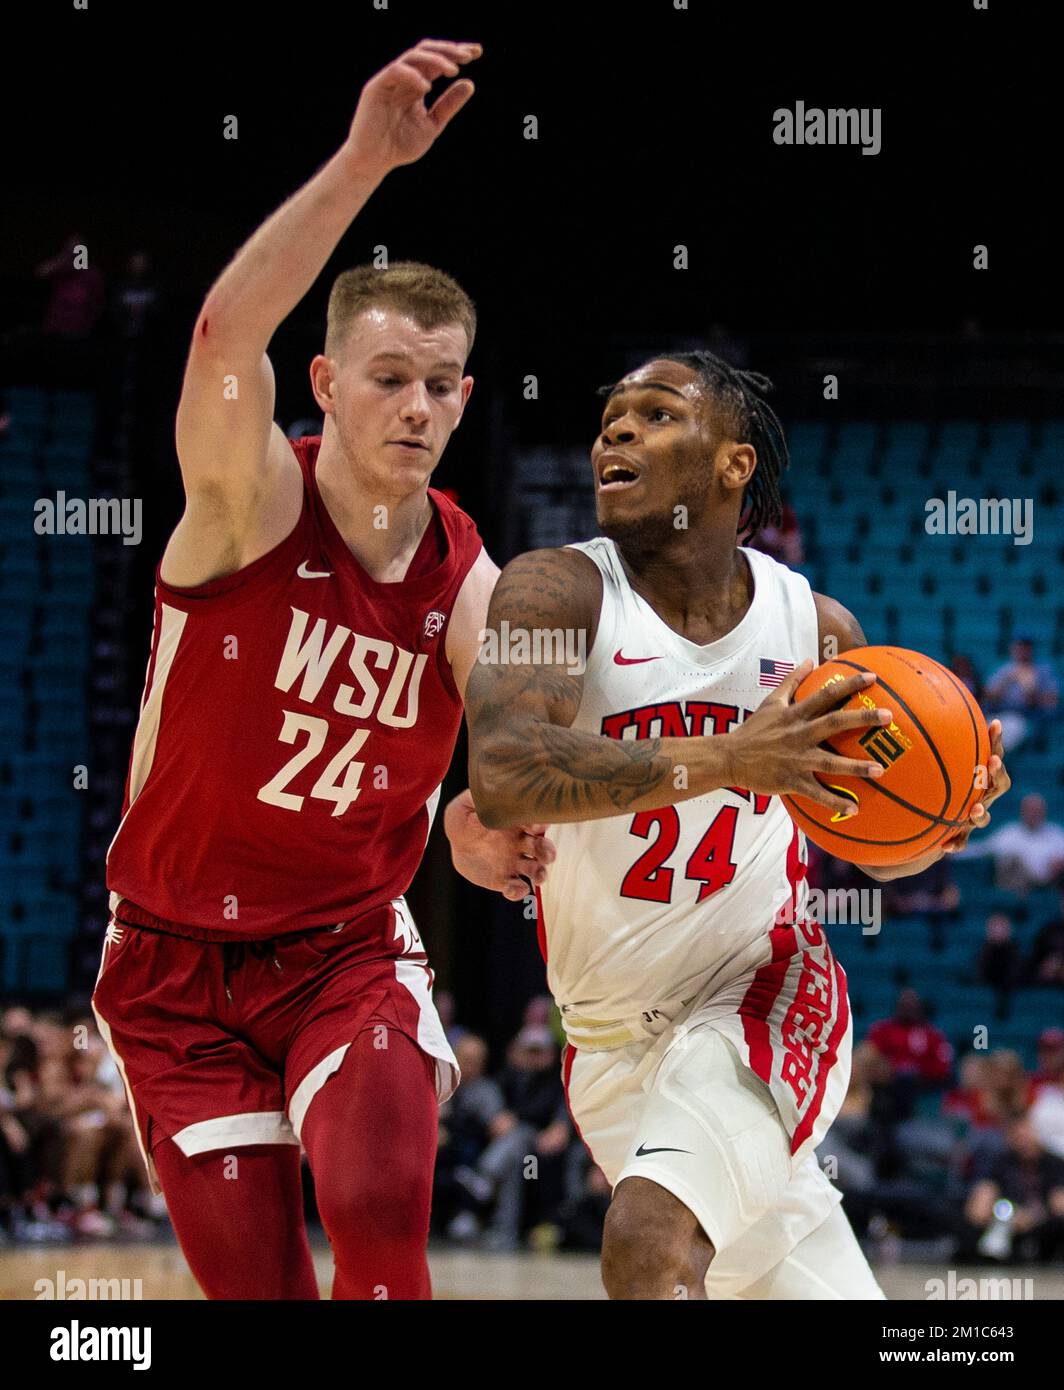 December 10 2022 Las Vegas, NV, U.S.A. UNLV guard Jackie Johnson III  (24)drives to the hoop during the NCAA The Clash Men's Basketball  Tournament game between UNLV Runnin Rebels and the Washington